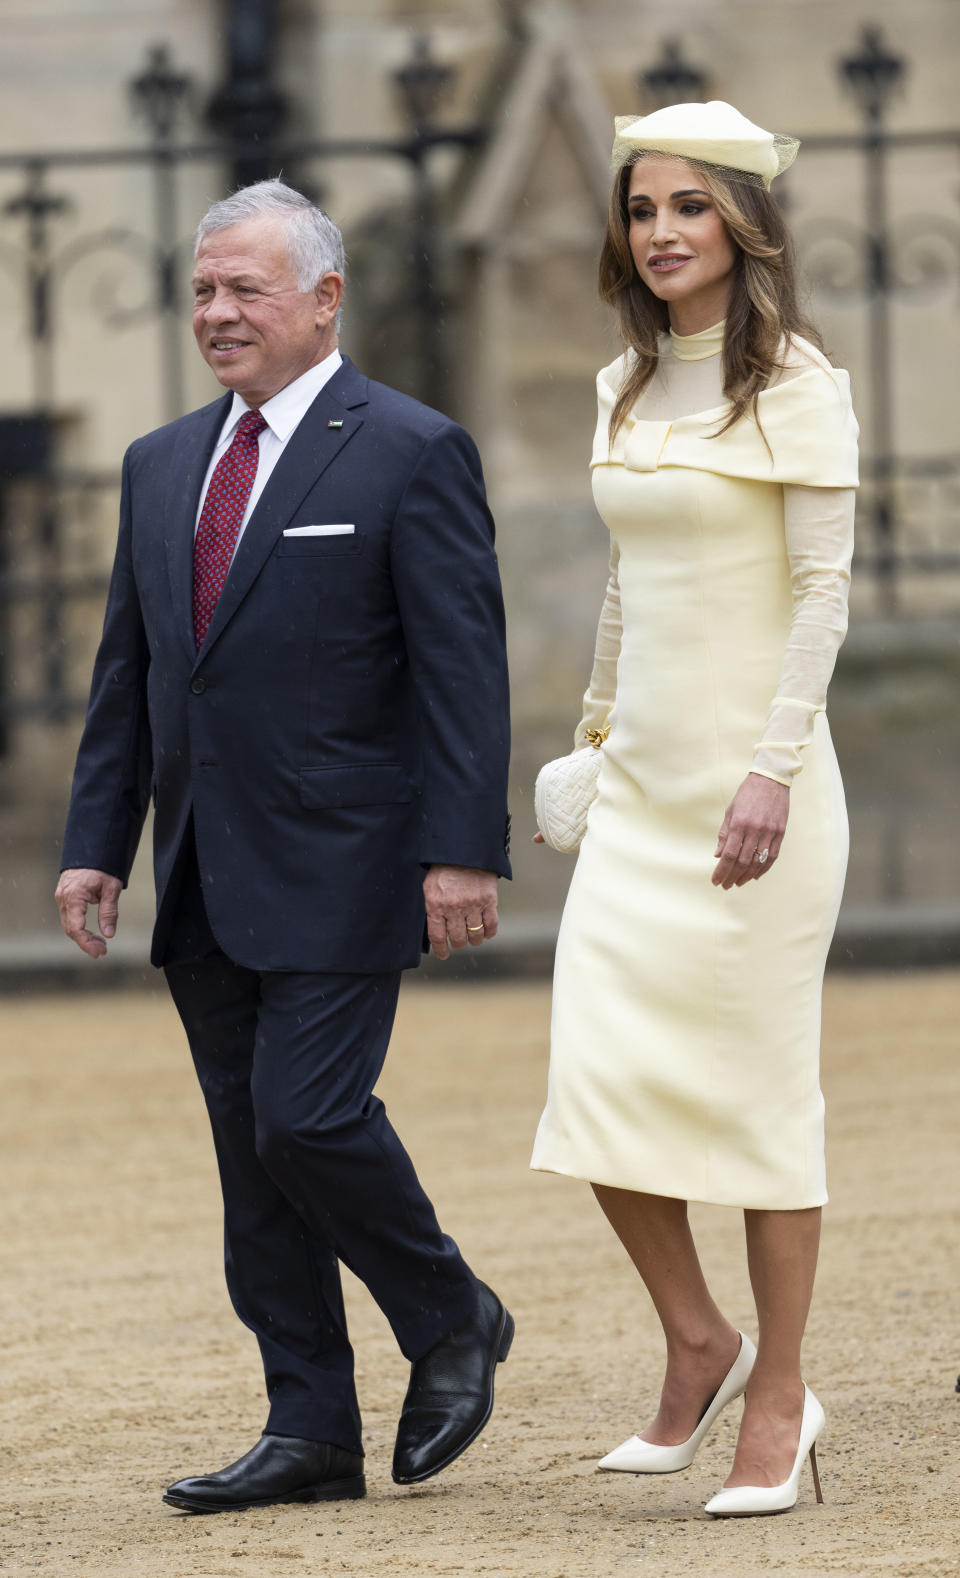 King Abdullah II of Jordan and Queen Rania of Jordan arrive at Westminster Abbey for the Coronation of King Charles III and Queen Camilla on May 6, 2023 in London, England.